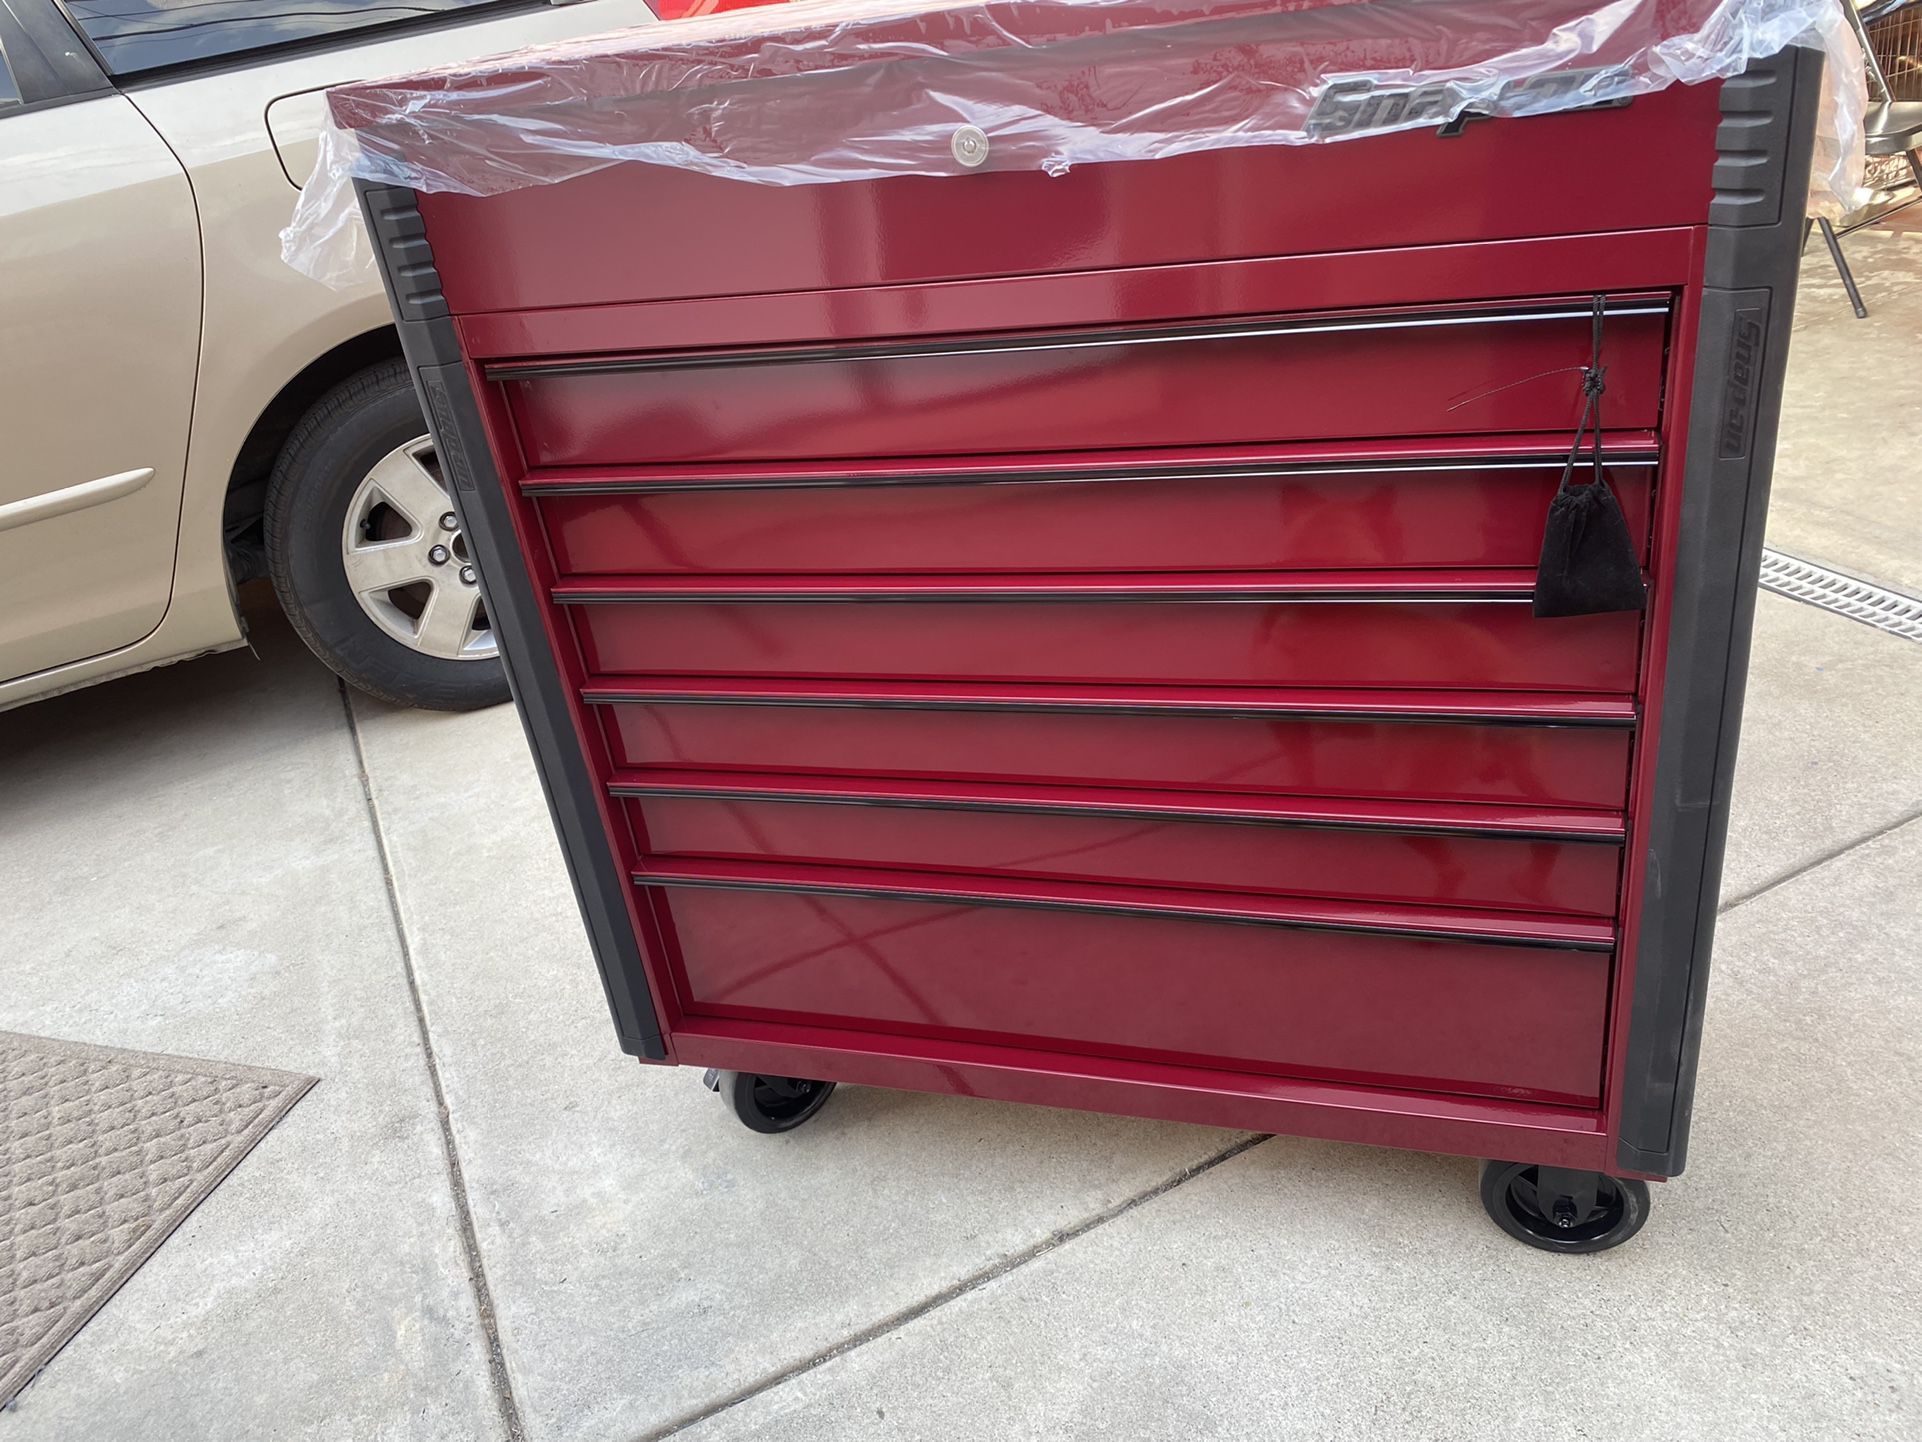 Original Pink Box 5 Drawer Tool Box for Sale in Los Angeles, CA - OfferUp